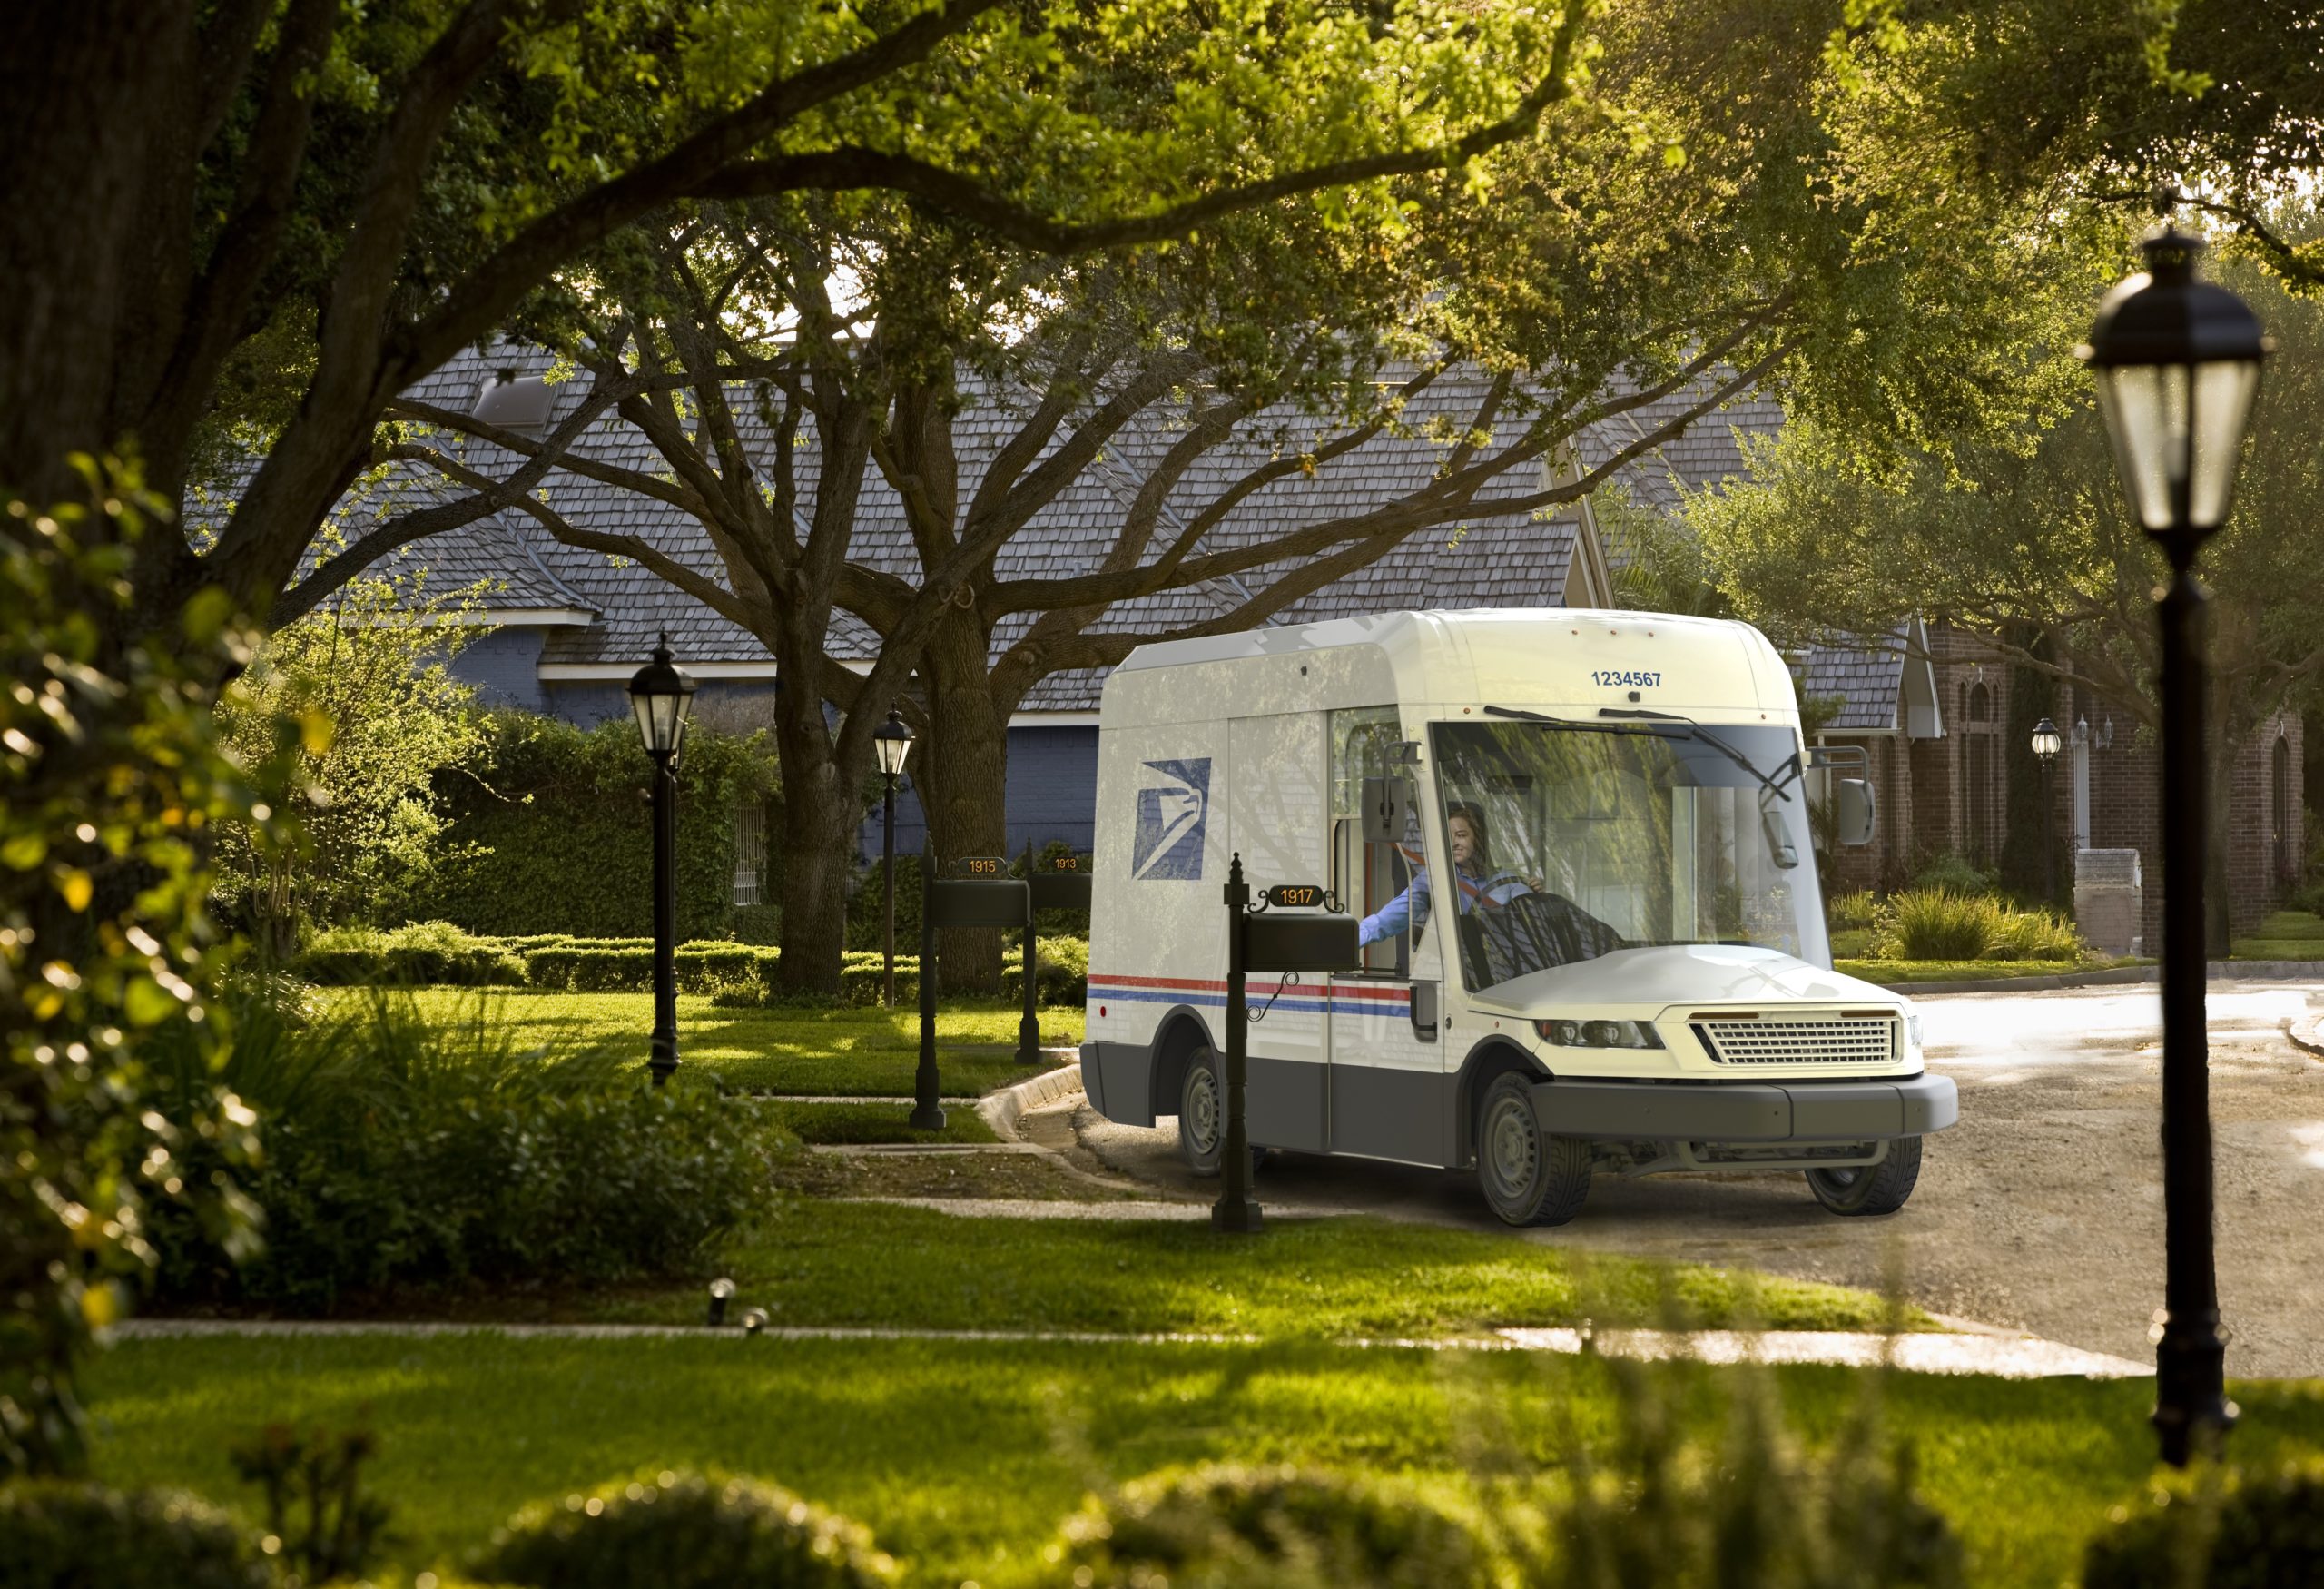 White House, EPA ask USPS to reconsider sidelining EVs for next-generation mail truck contractWhite House, EPA ask USPS to reconsider sidelining EVs for next-generation mail truck contract